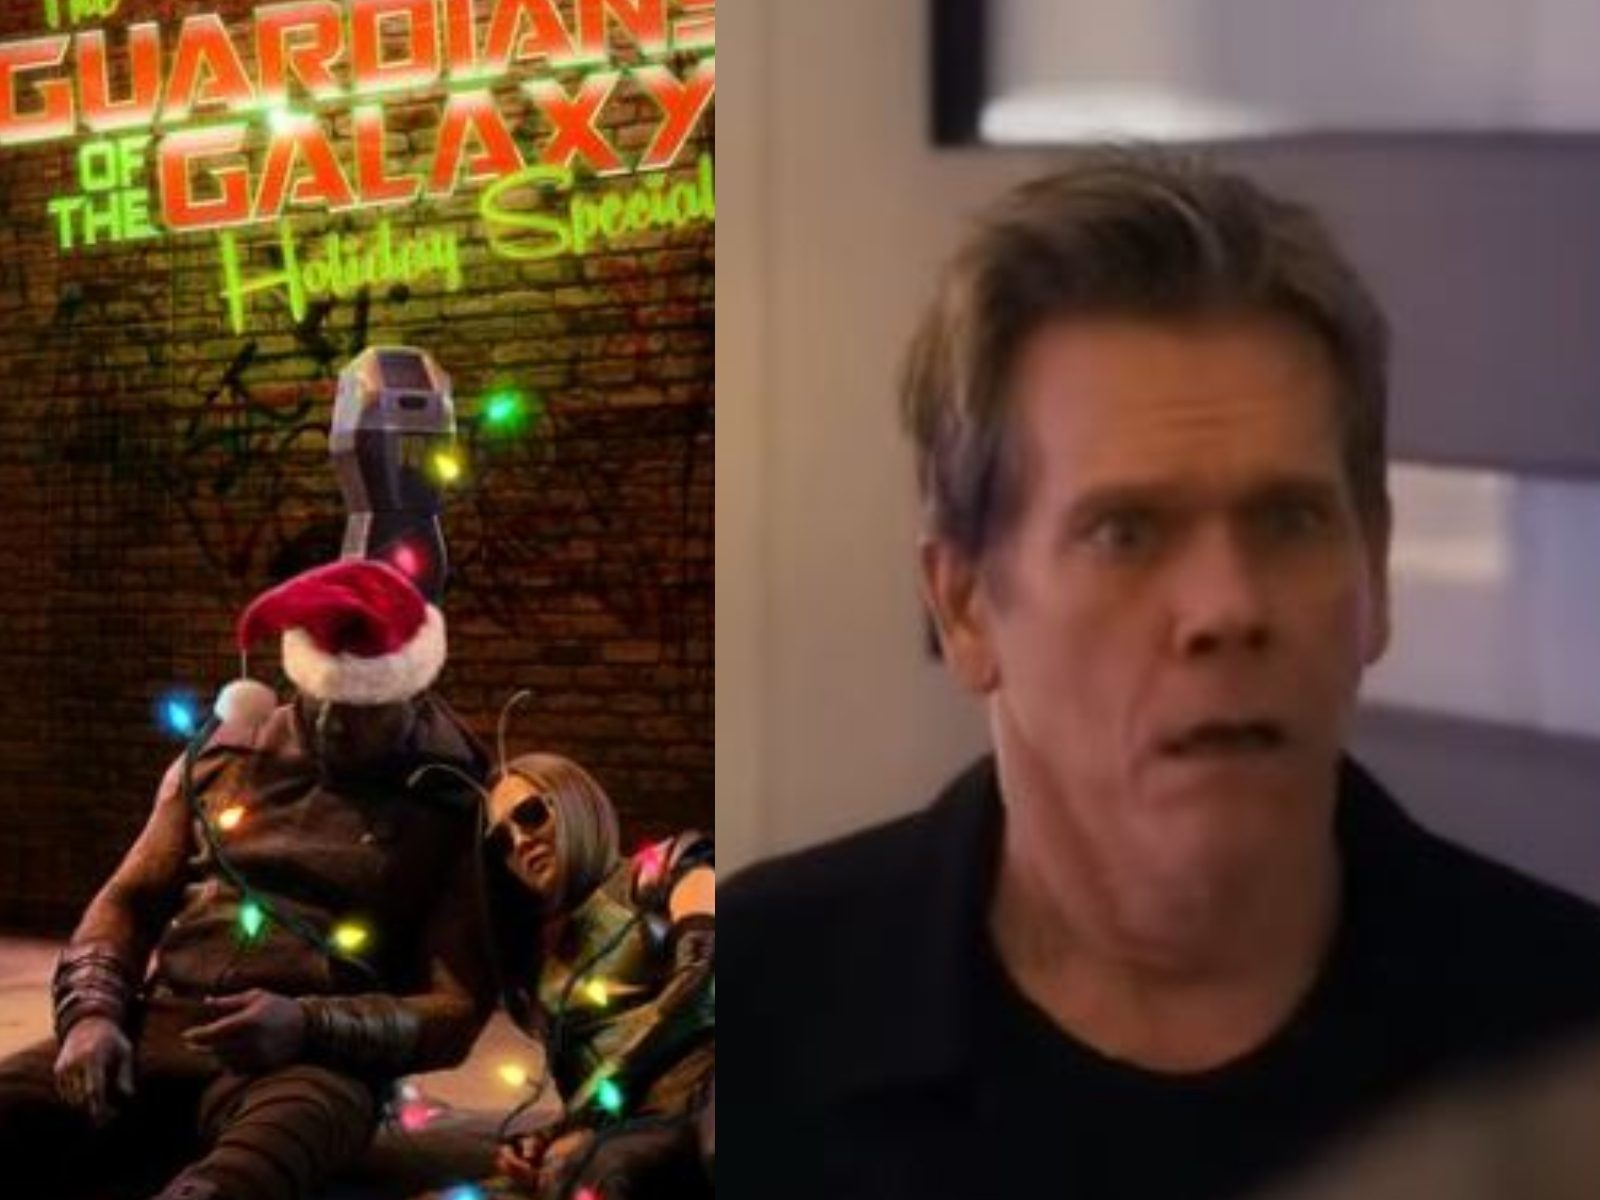 The Guardians of the Galaxy Holiday Special (2022) - Kevin Bacon's